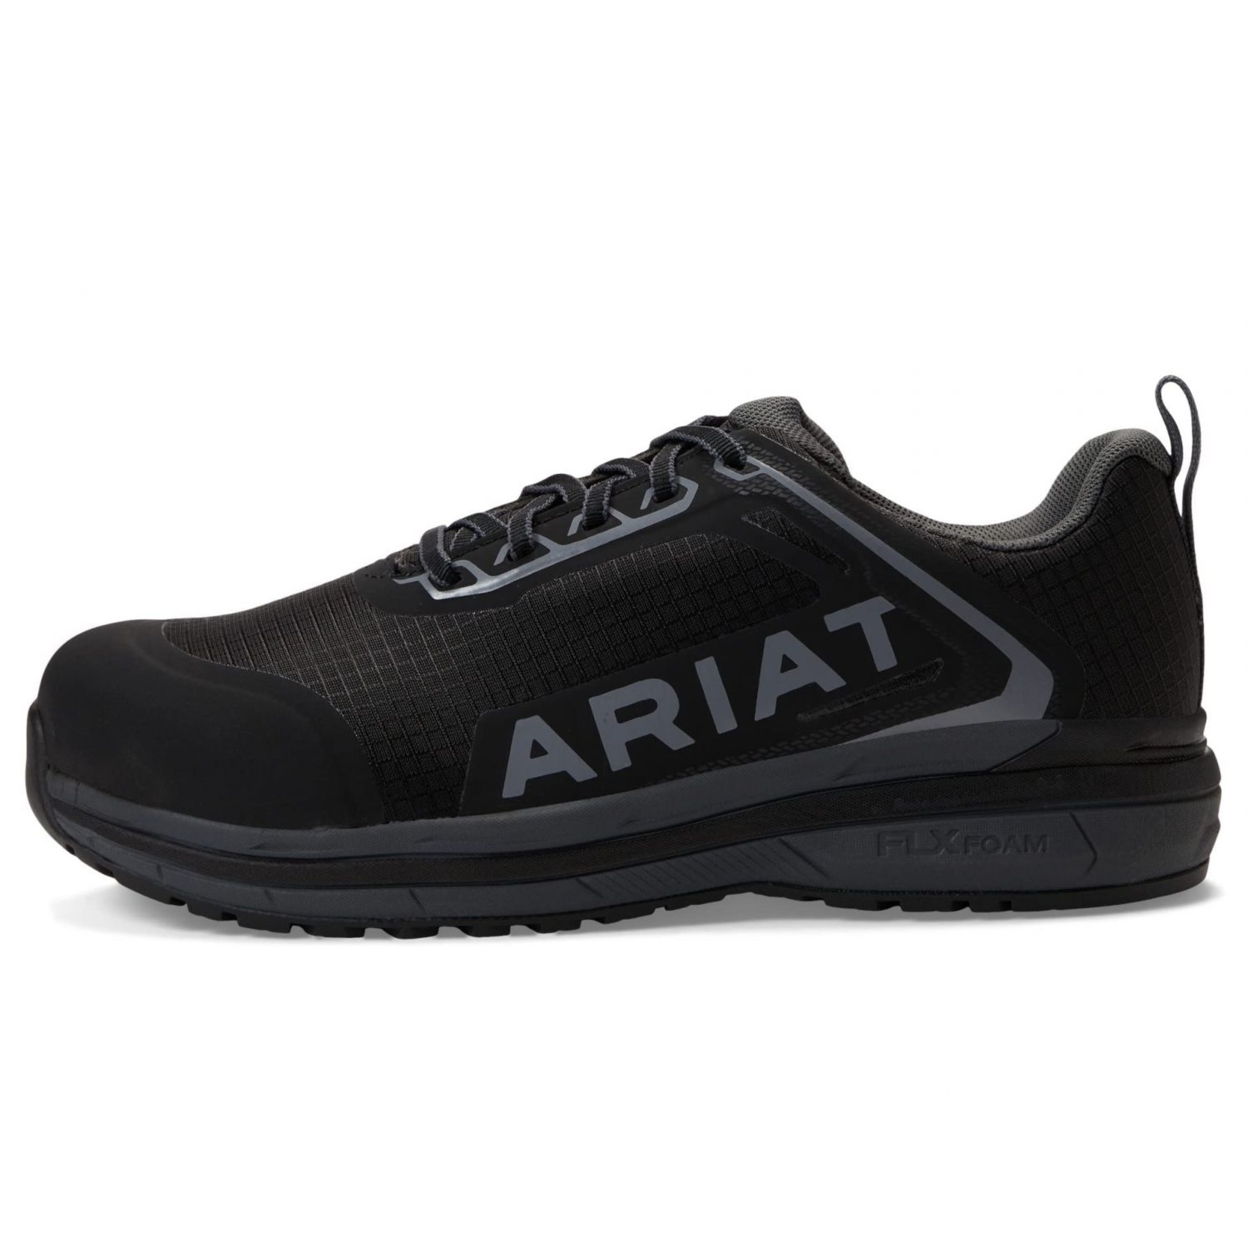 ARIAT Women's Outpace Composite Toe Safety Shoe Fire ONE SIZE BLACK - BLACK, 9.5